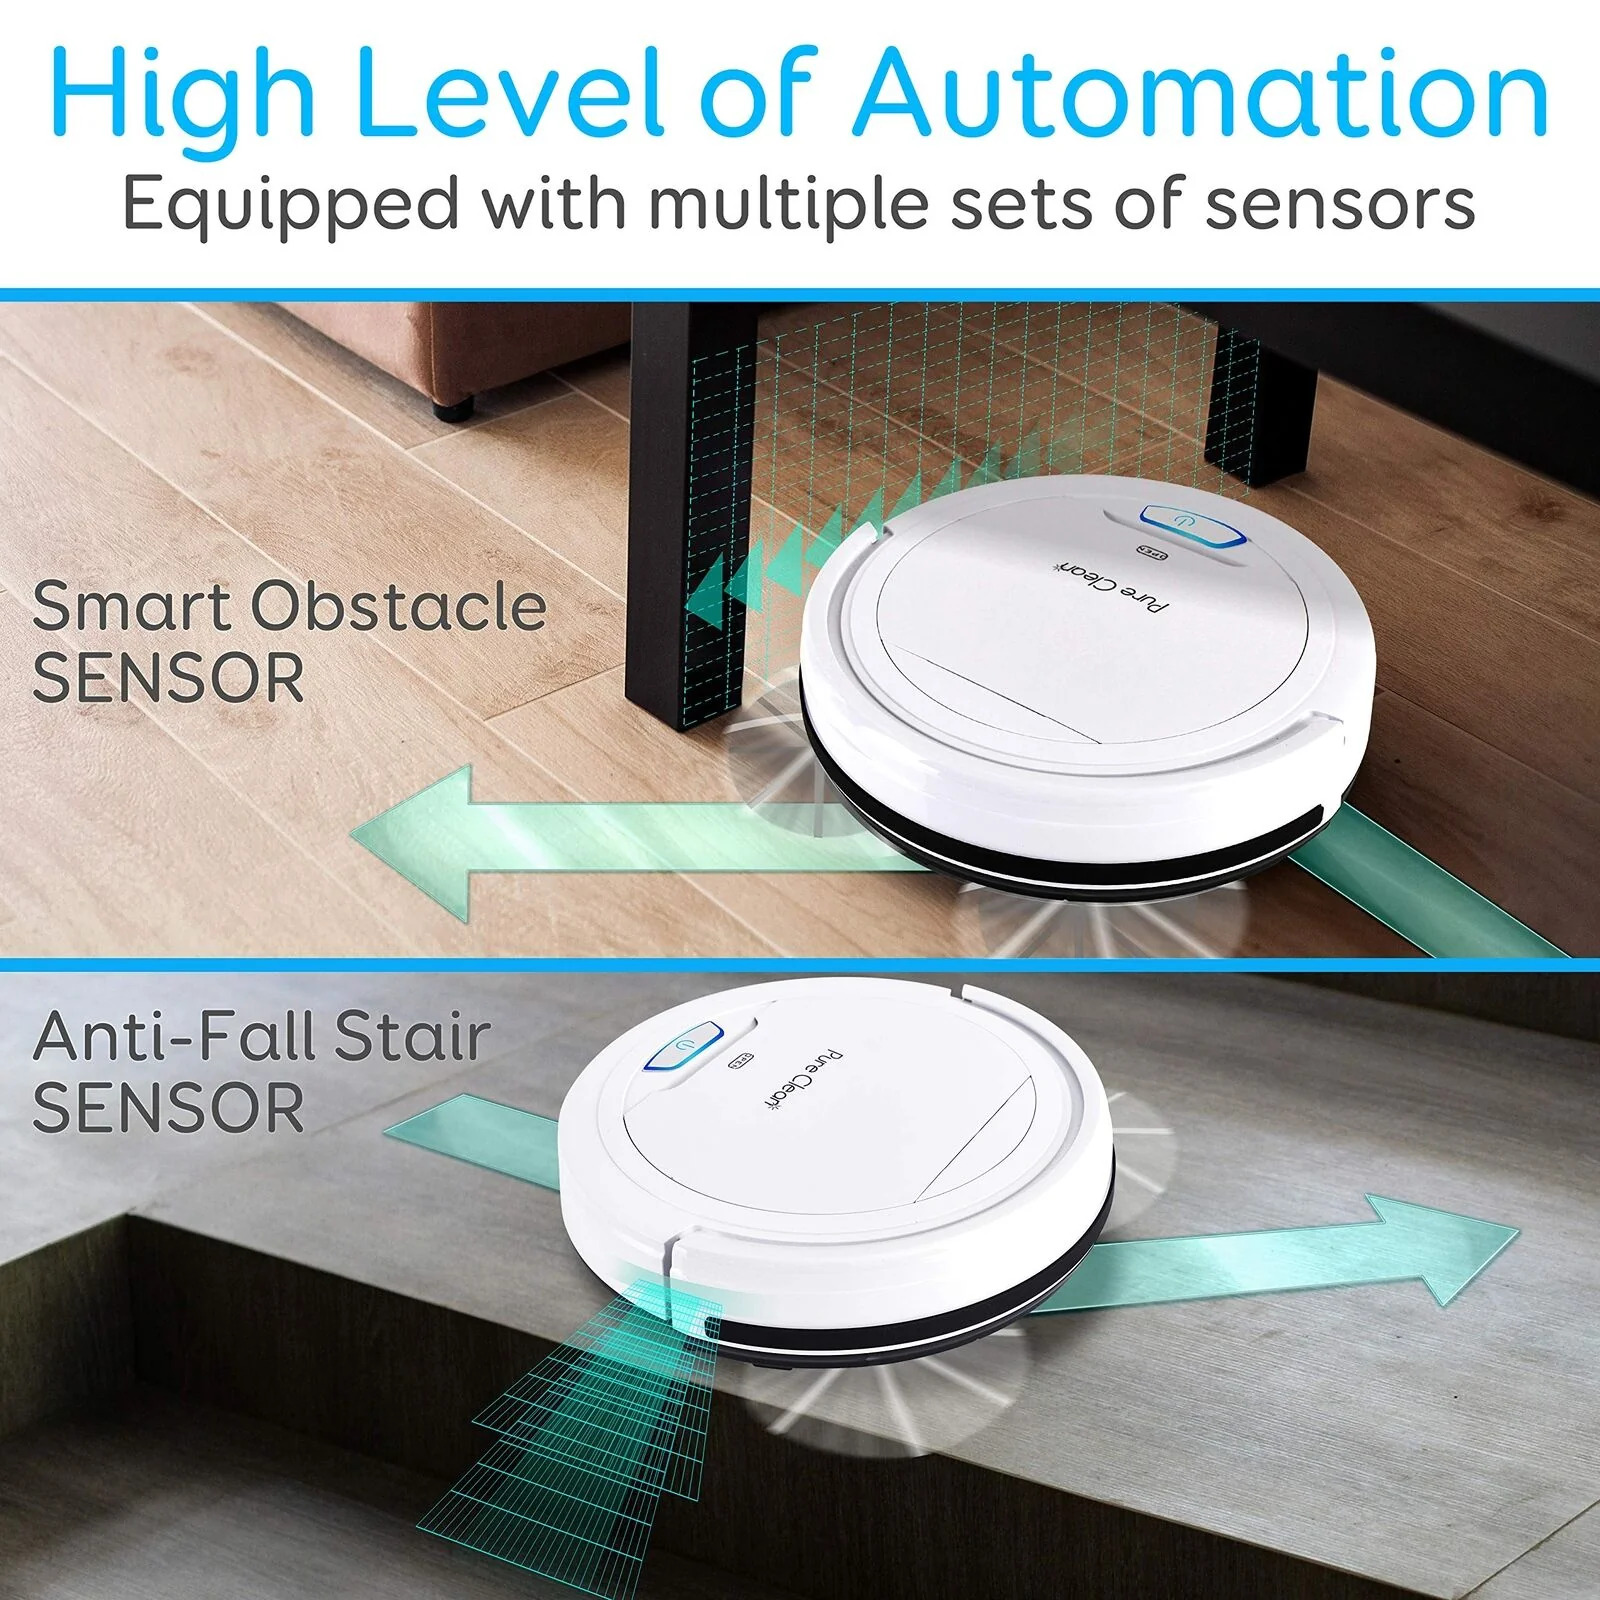 Pyle PureClean Smart Automatic Robot Vacuum Powerful Home Cleaning System, White - image 5 of 9